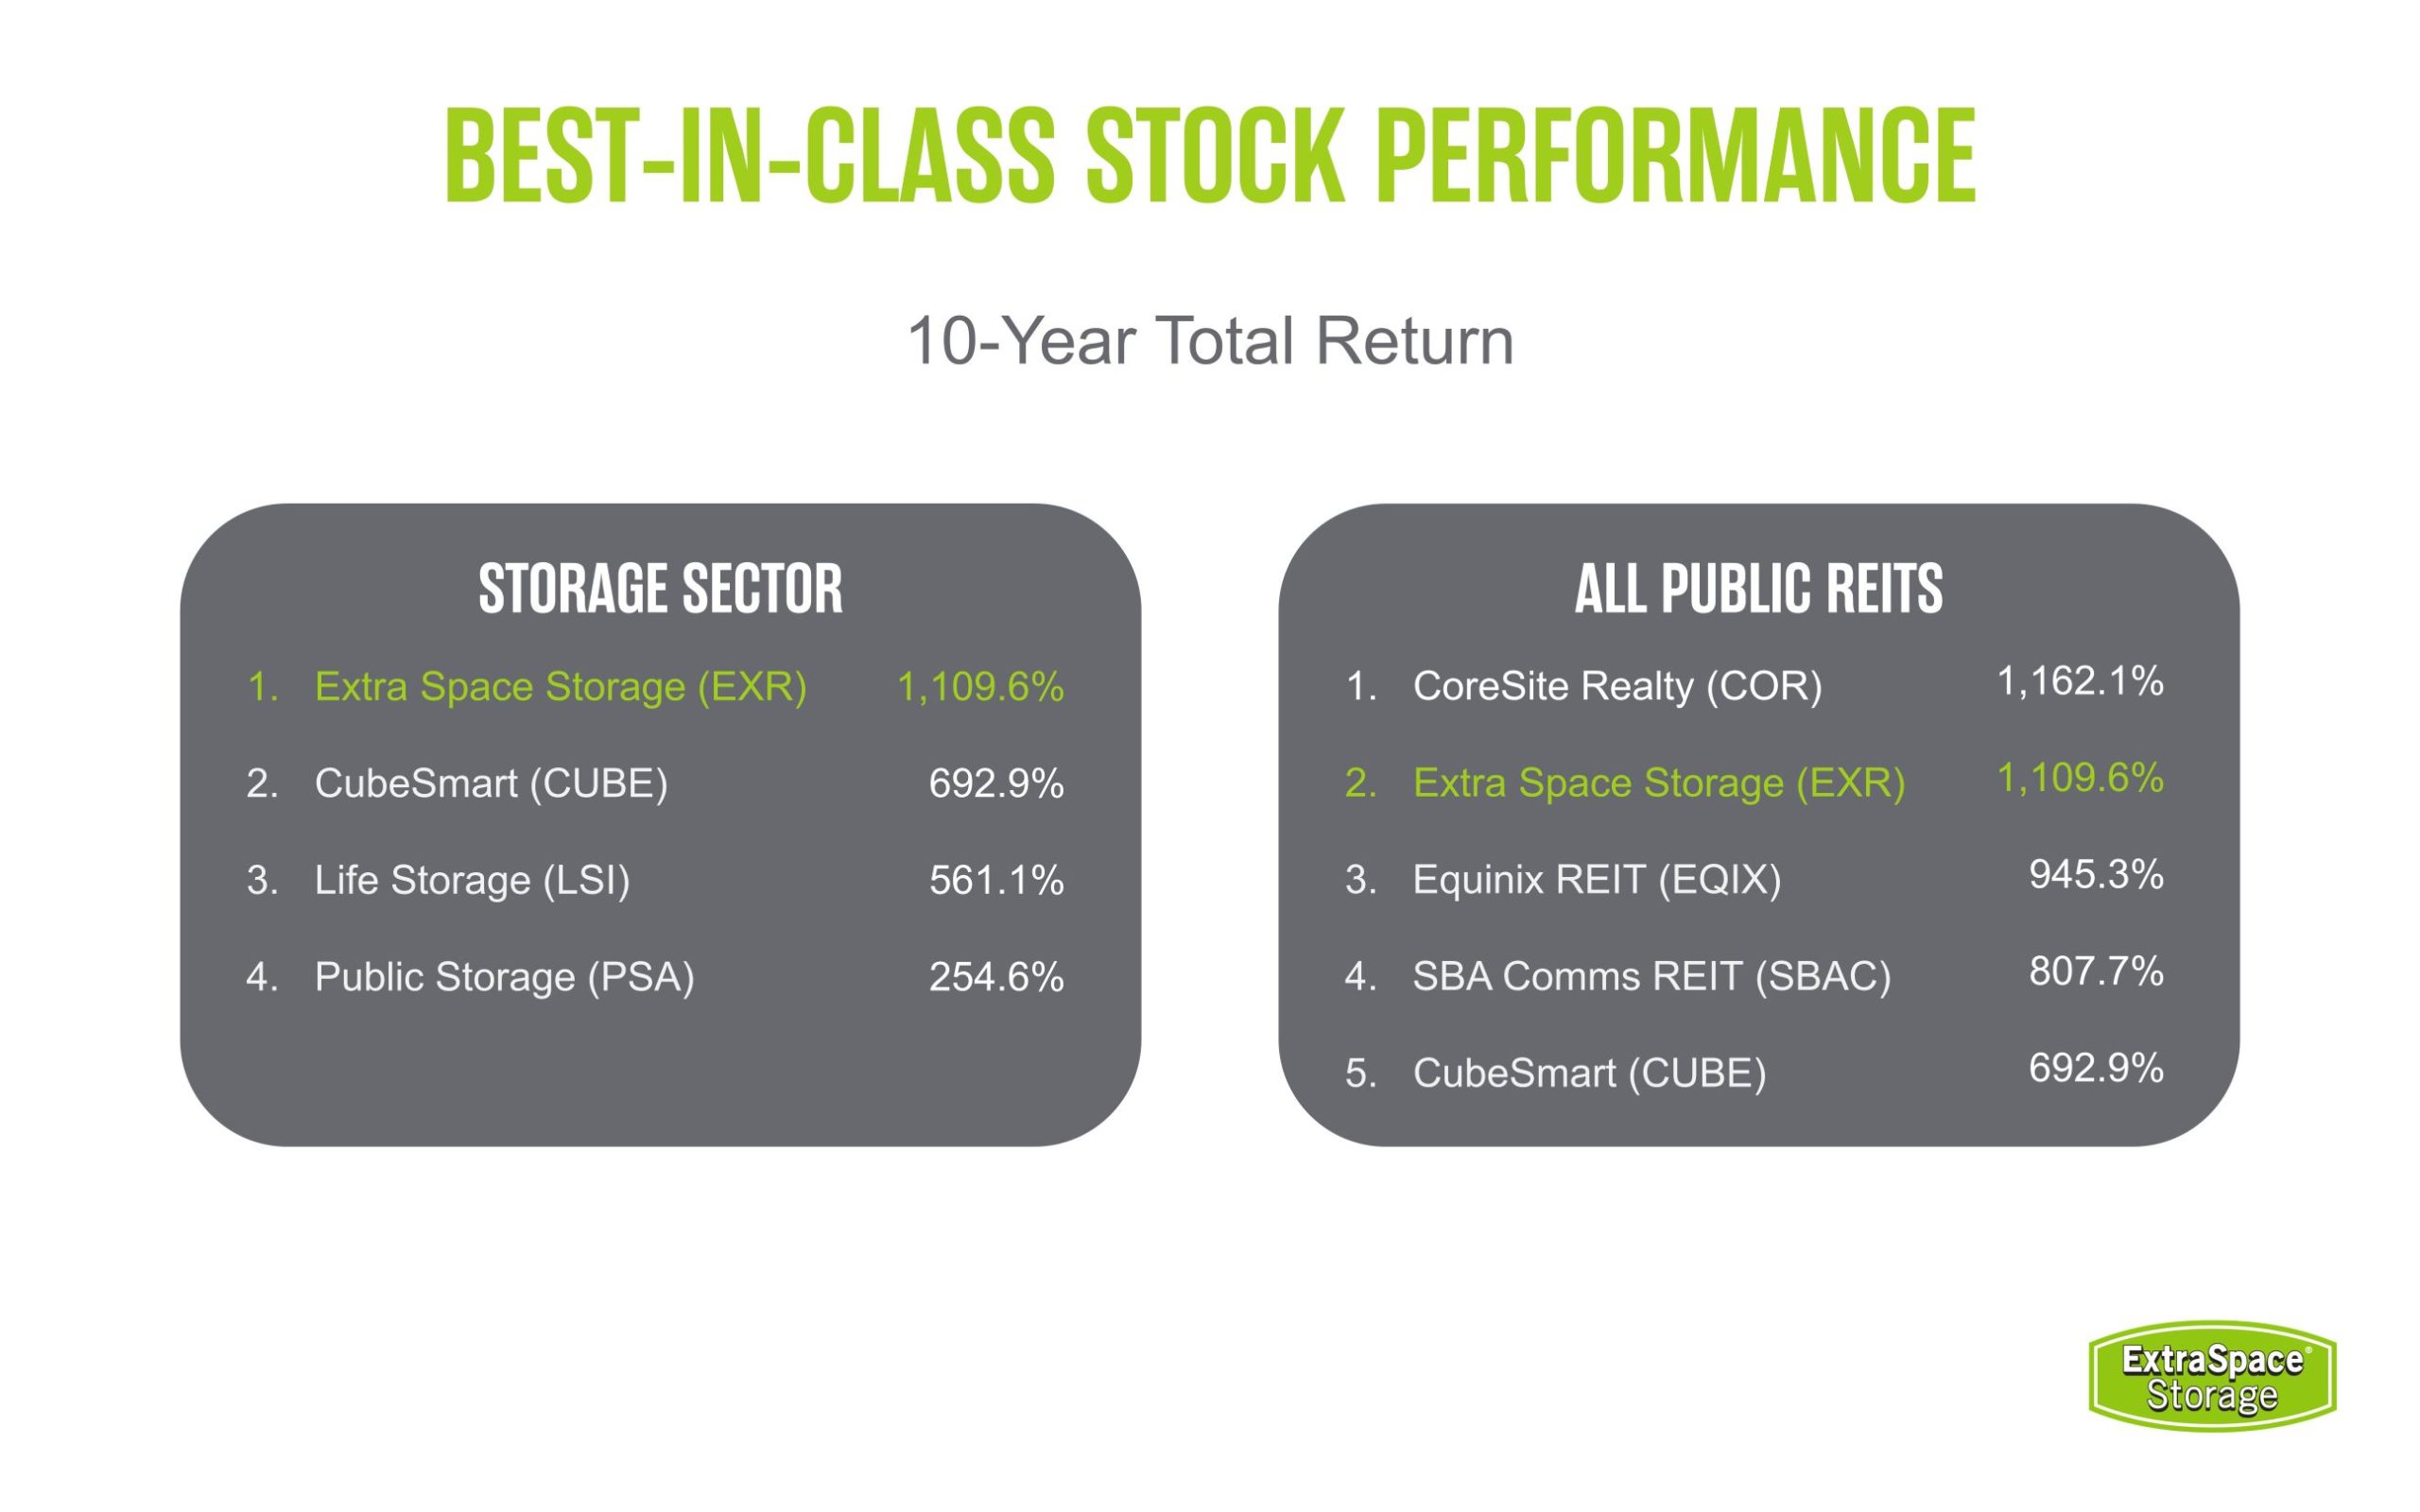 Image Showing Extra Space Storage 10-Year Stock Performance